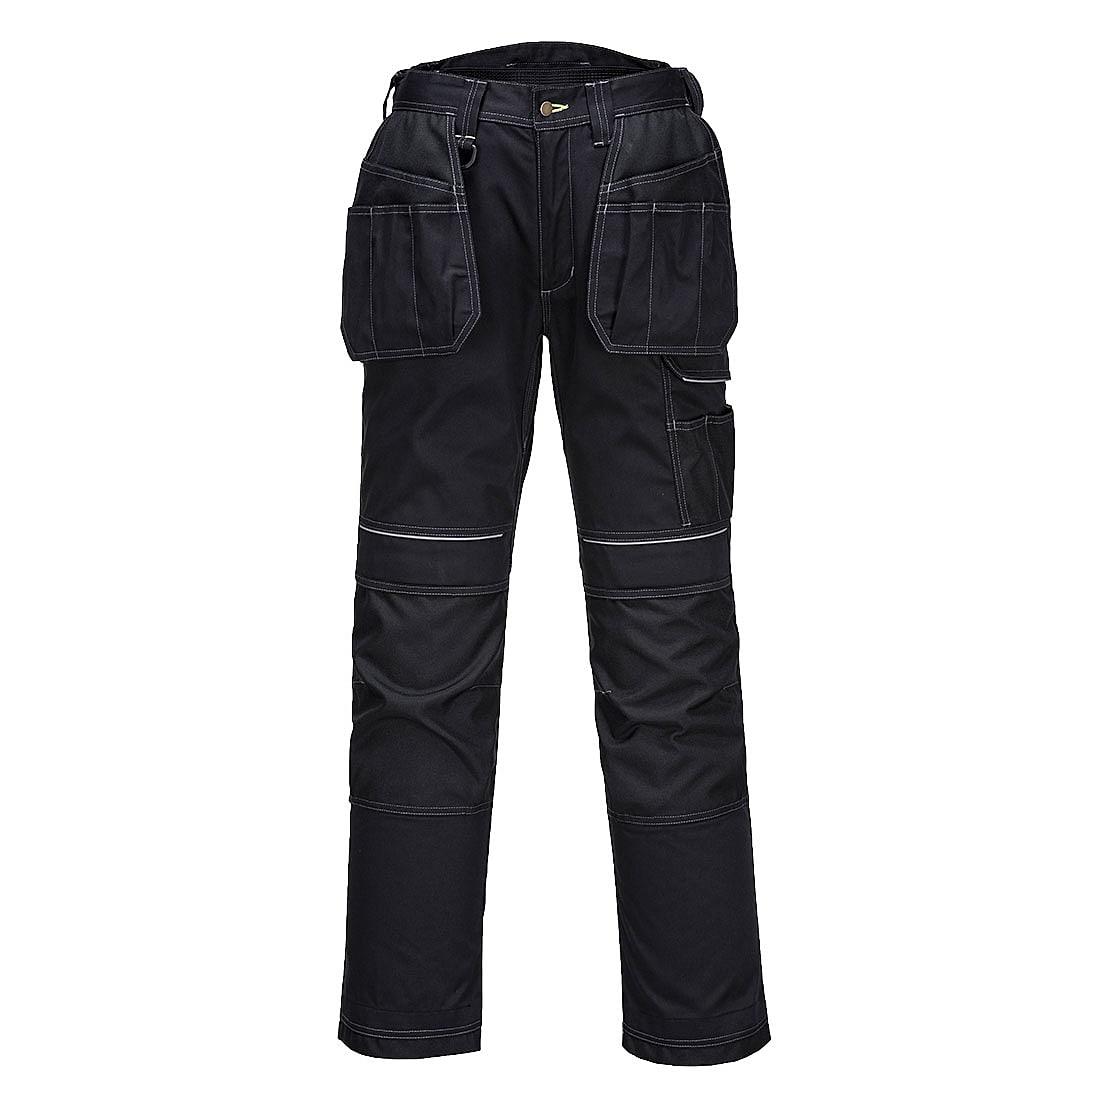 Portwest PW3 Holster Work Trousers in Black (Product Code: T602)